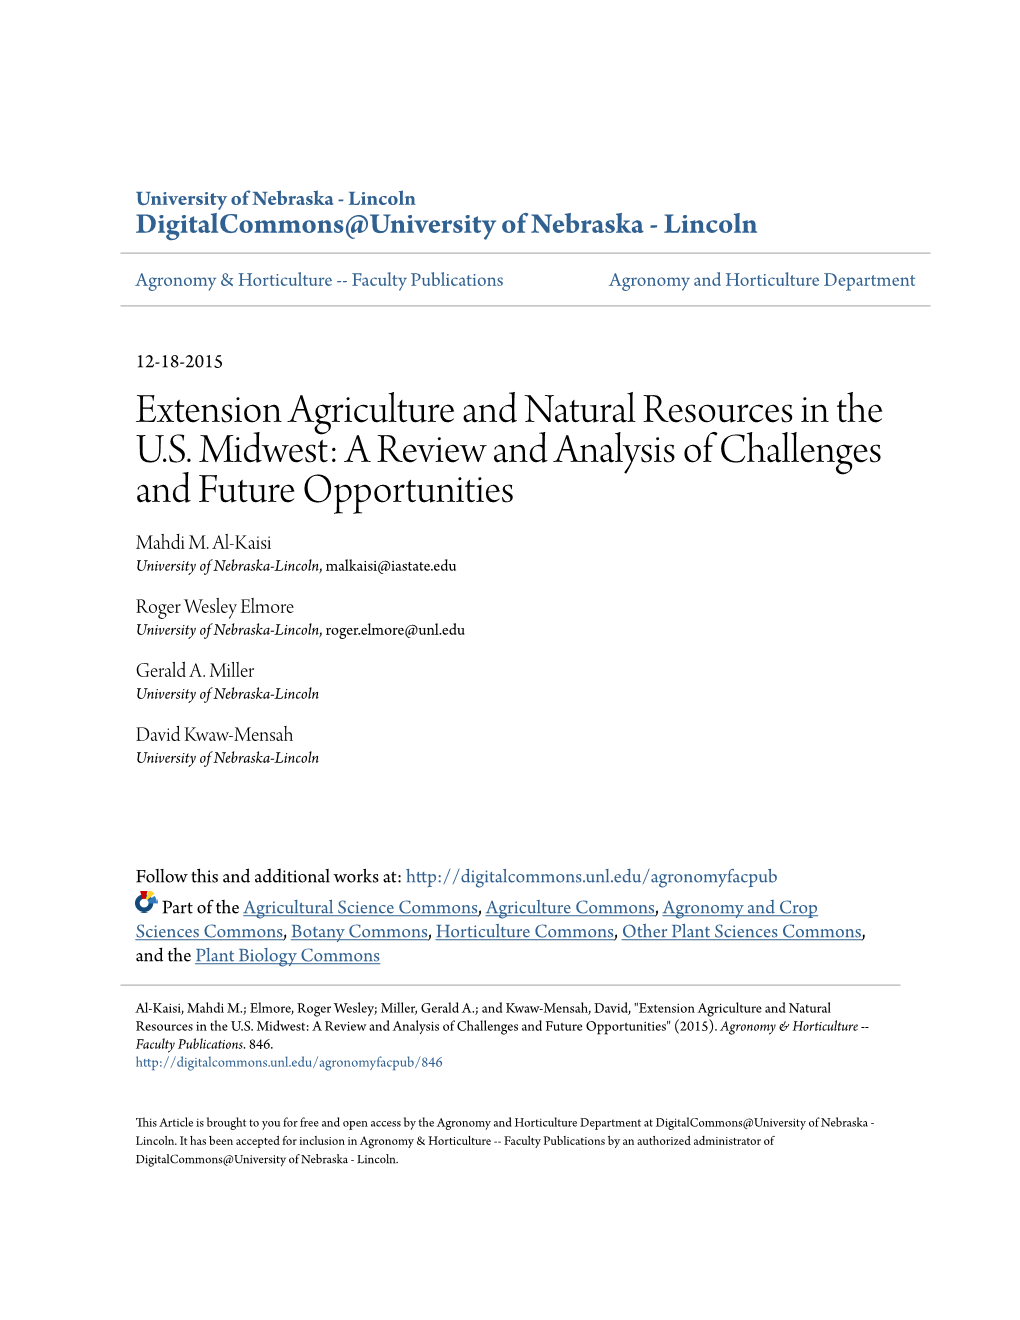 Extension Agriculture and Natural Resources in the U.S. Midwest: a Review and Analysis of Challenges and Future Opportunities Mahdi M